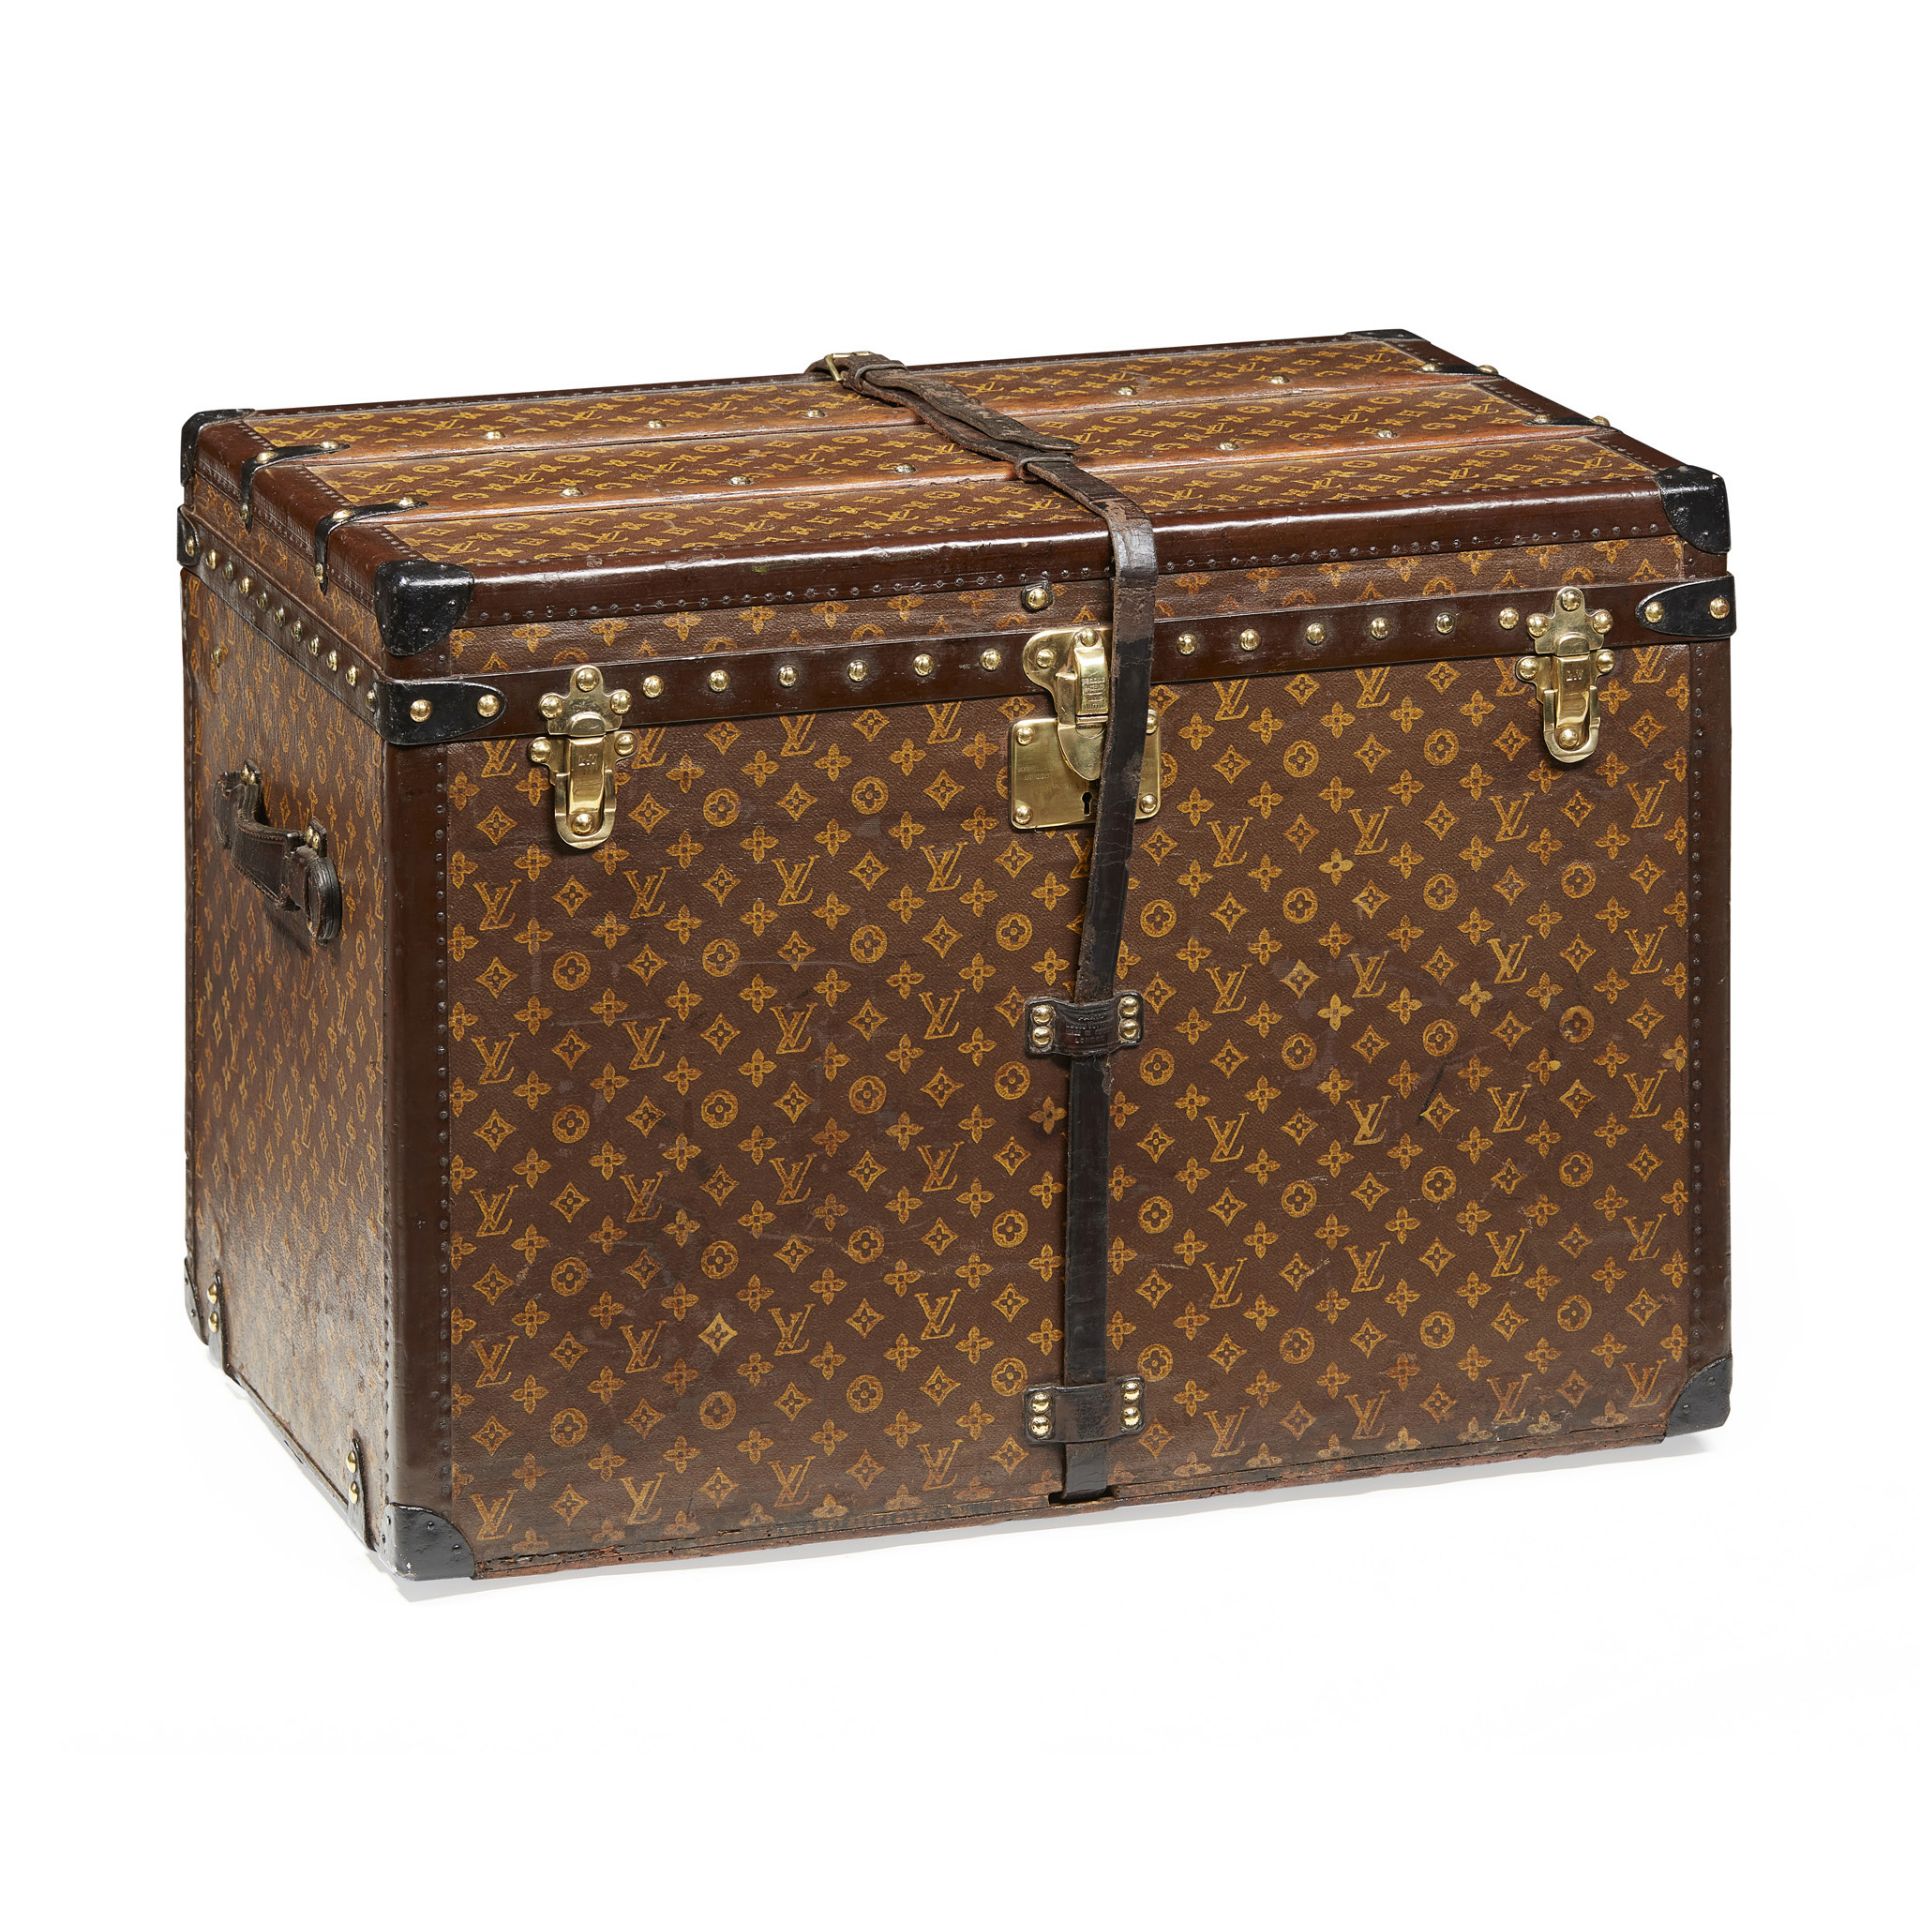 LOUIS VUITTON LARGE TRUNK EARLY 20TH CENTURY